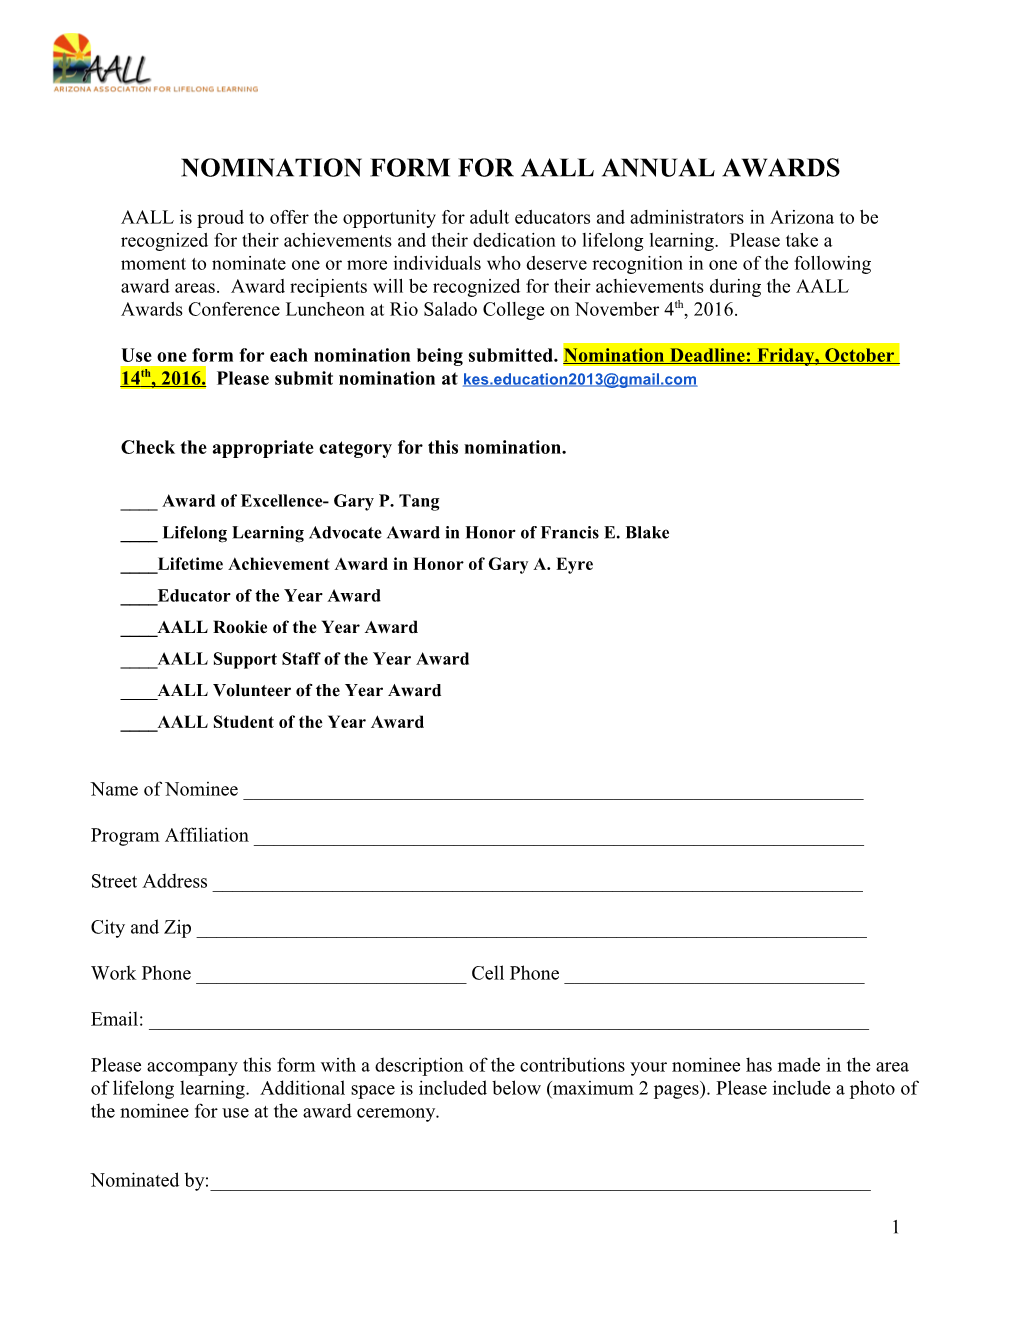 Nomination Form for Aall Annual Awards